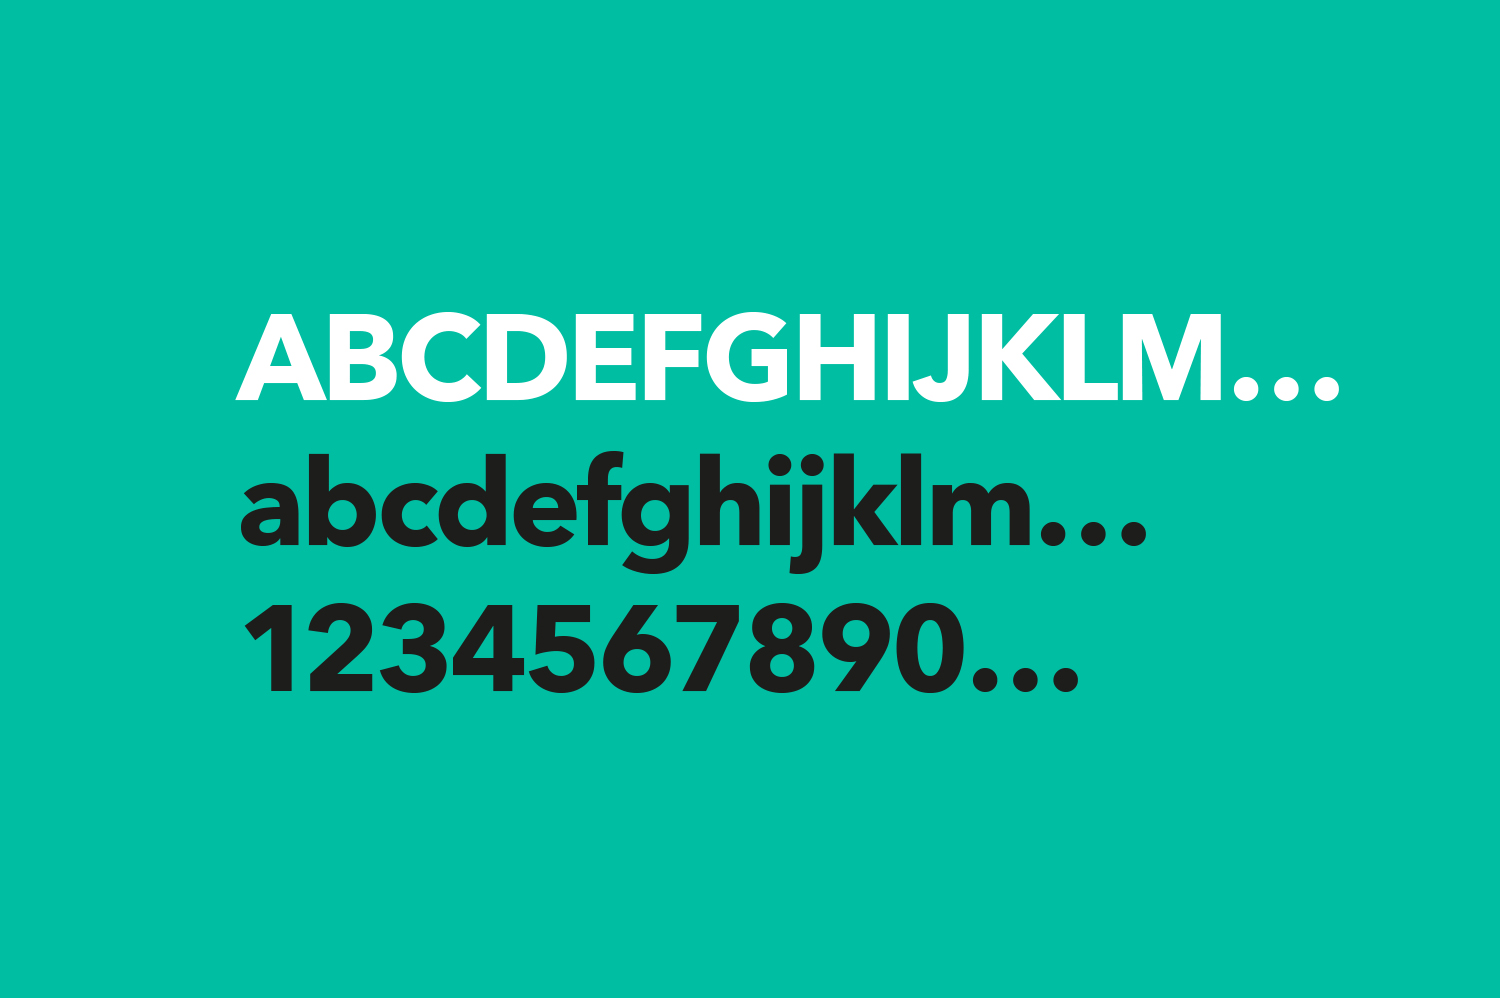 Excedr type design by Graham Smith